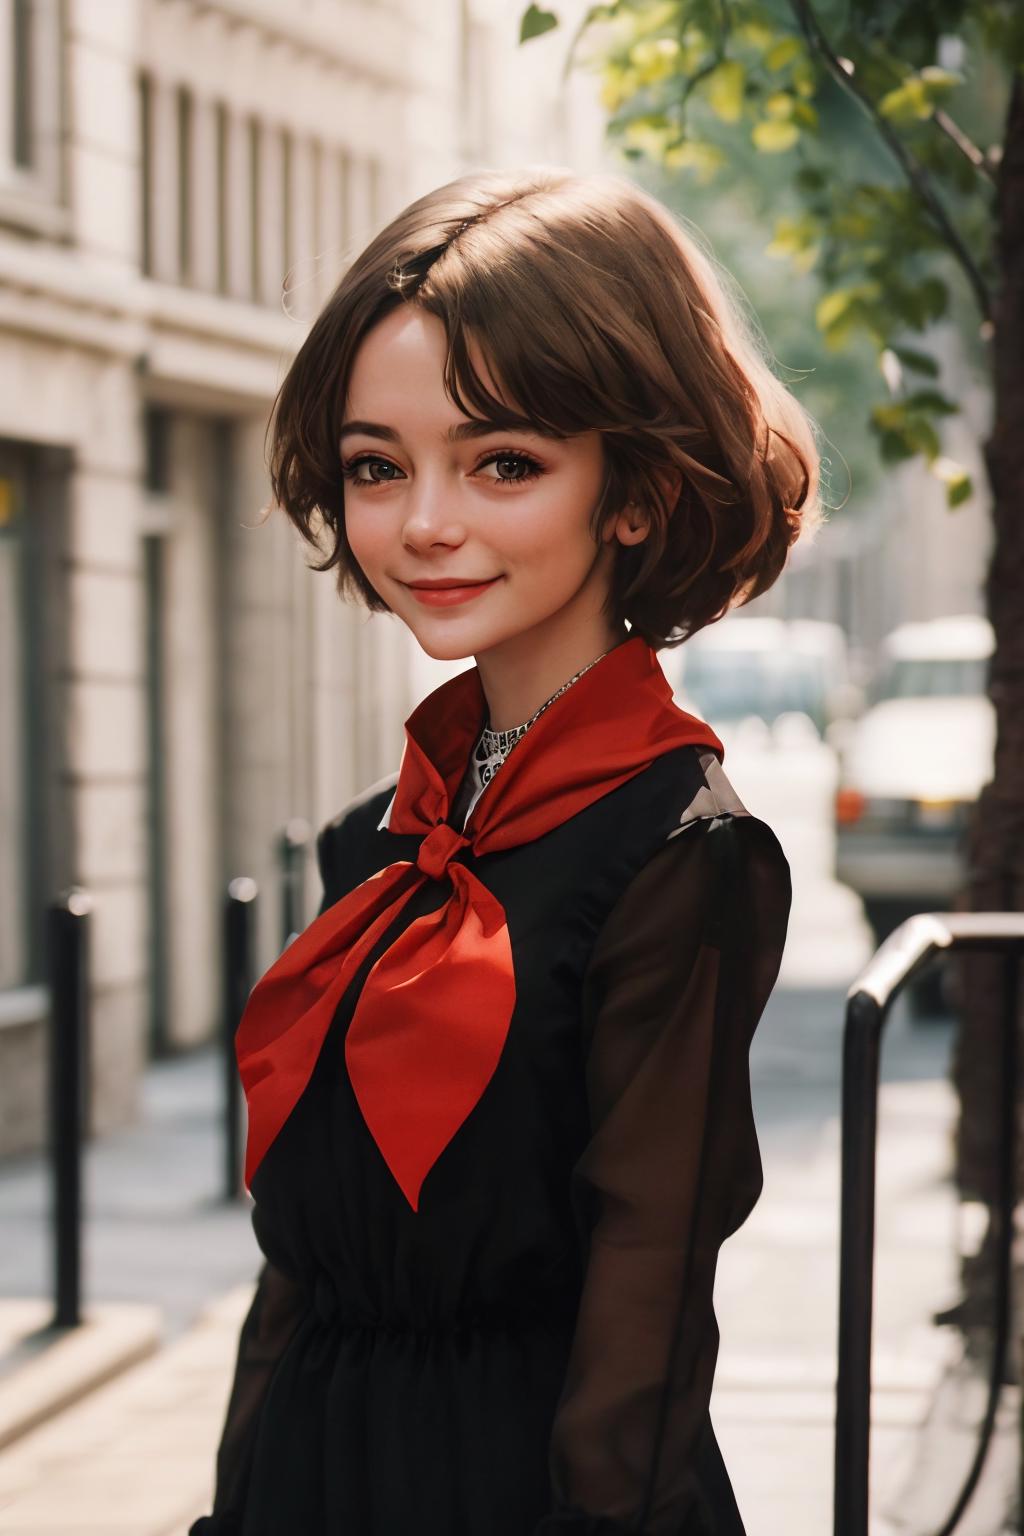 A young woman wearing a red bow tie and black dress on a city sidewalk.